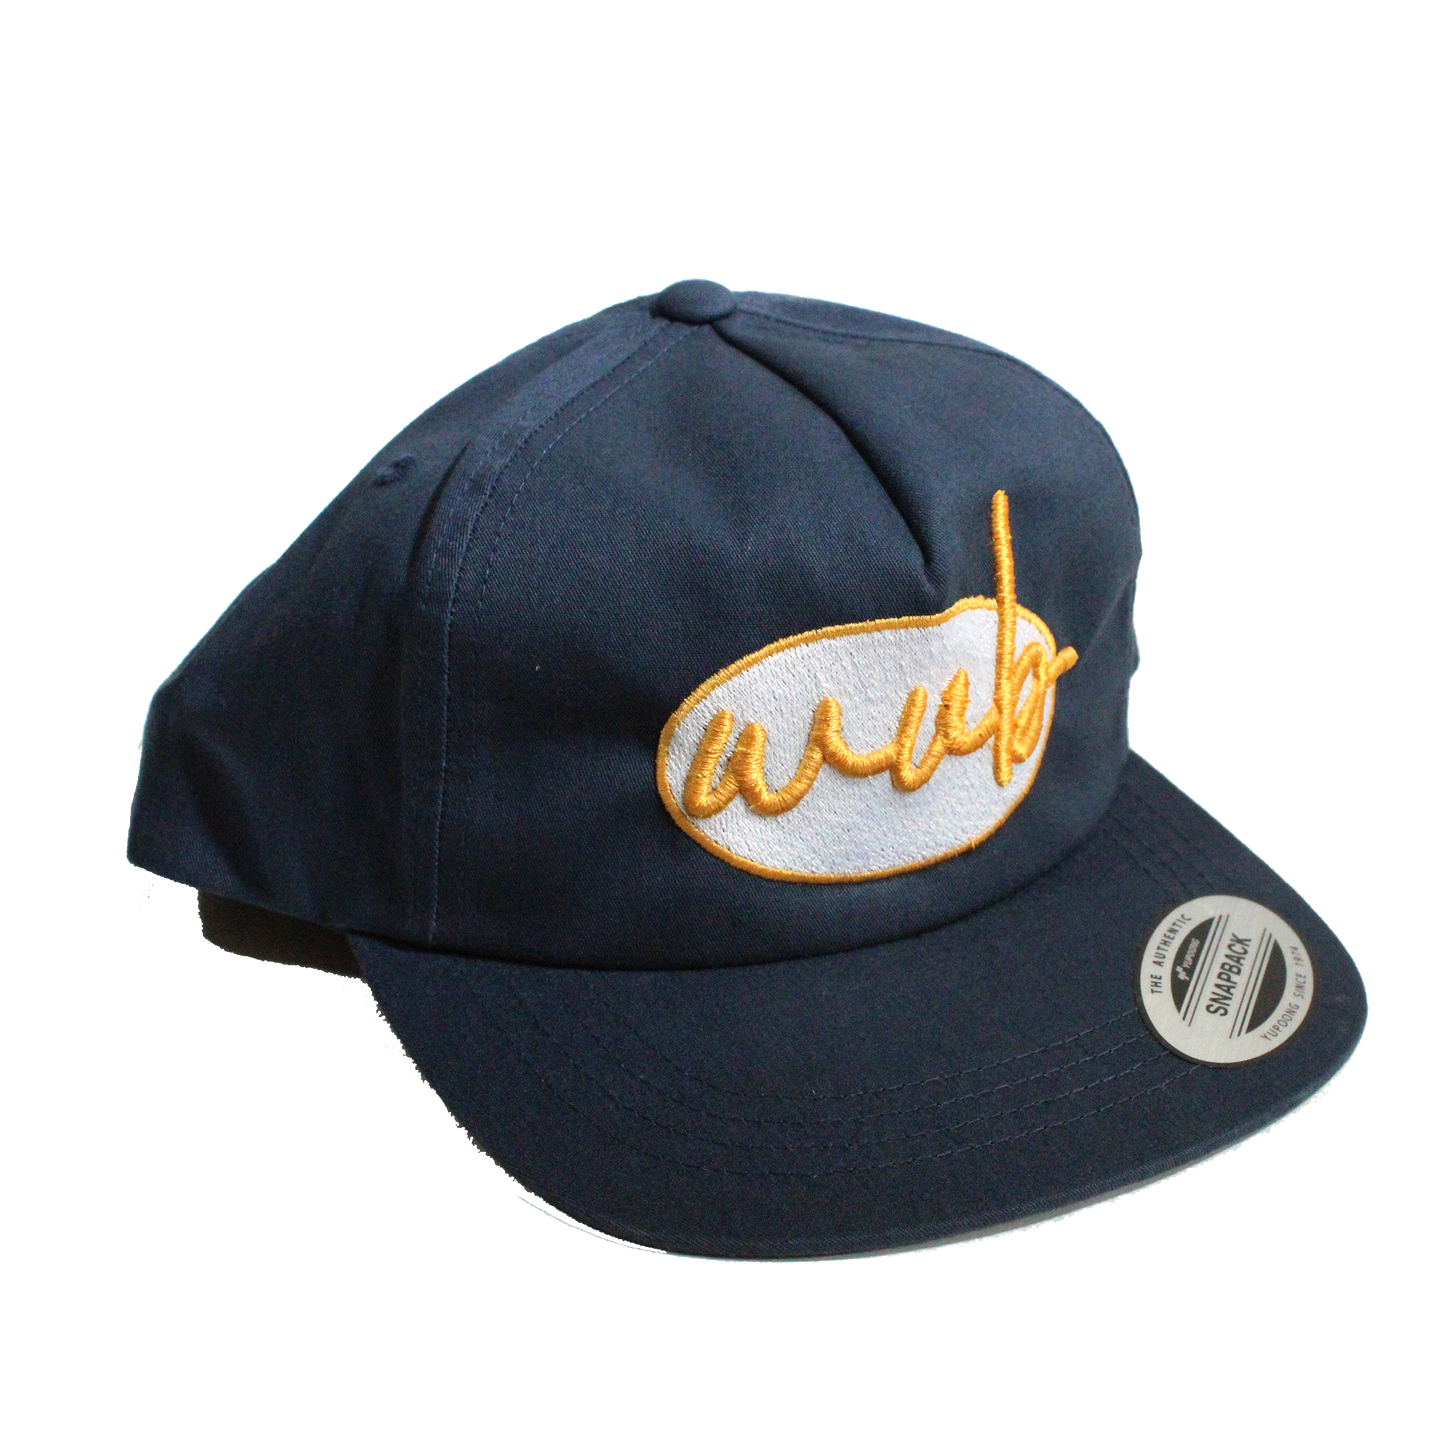 PUFFY OVAL UNSTRUCTURED SNAPBACK - NAVY